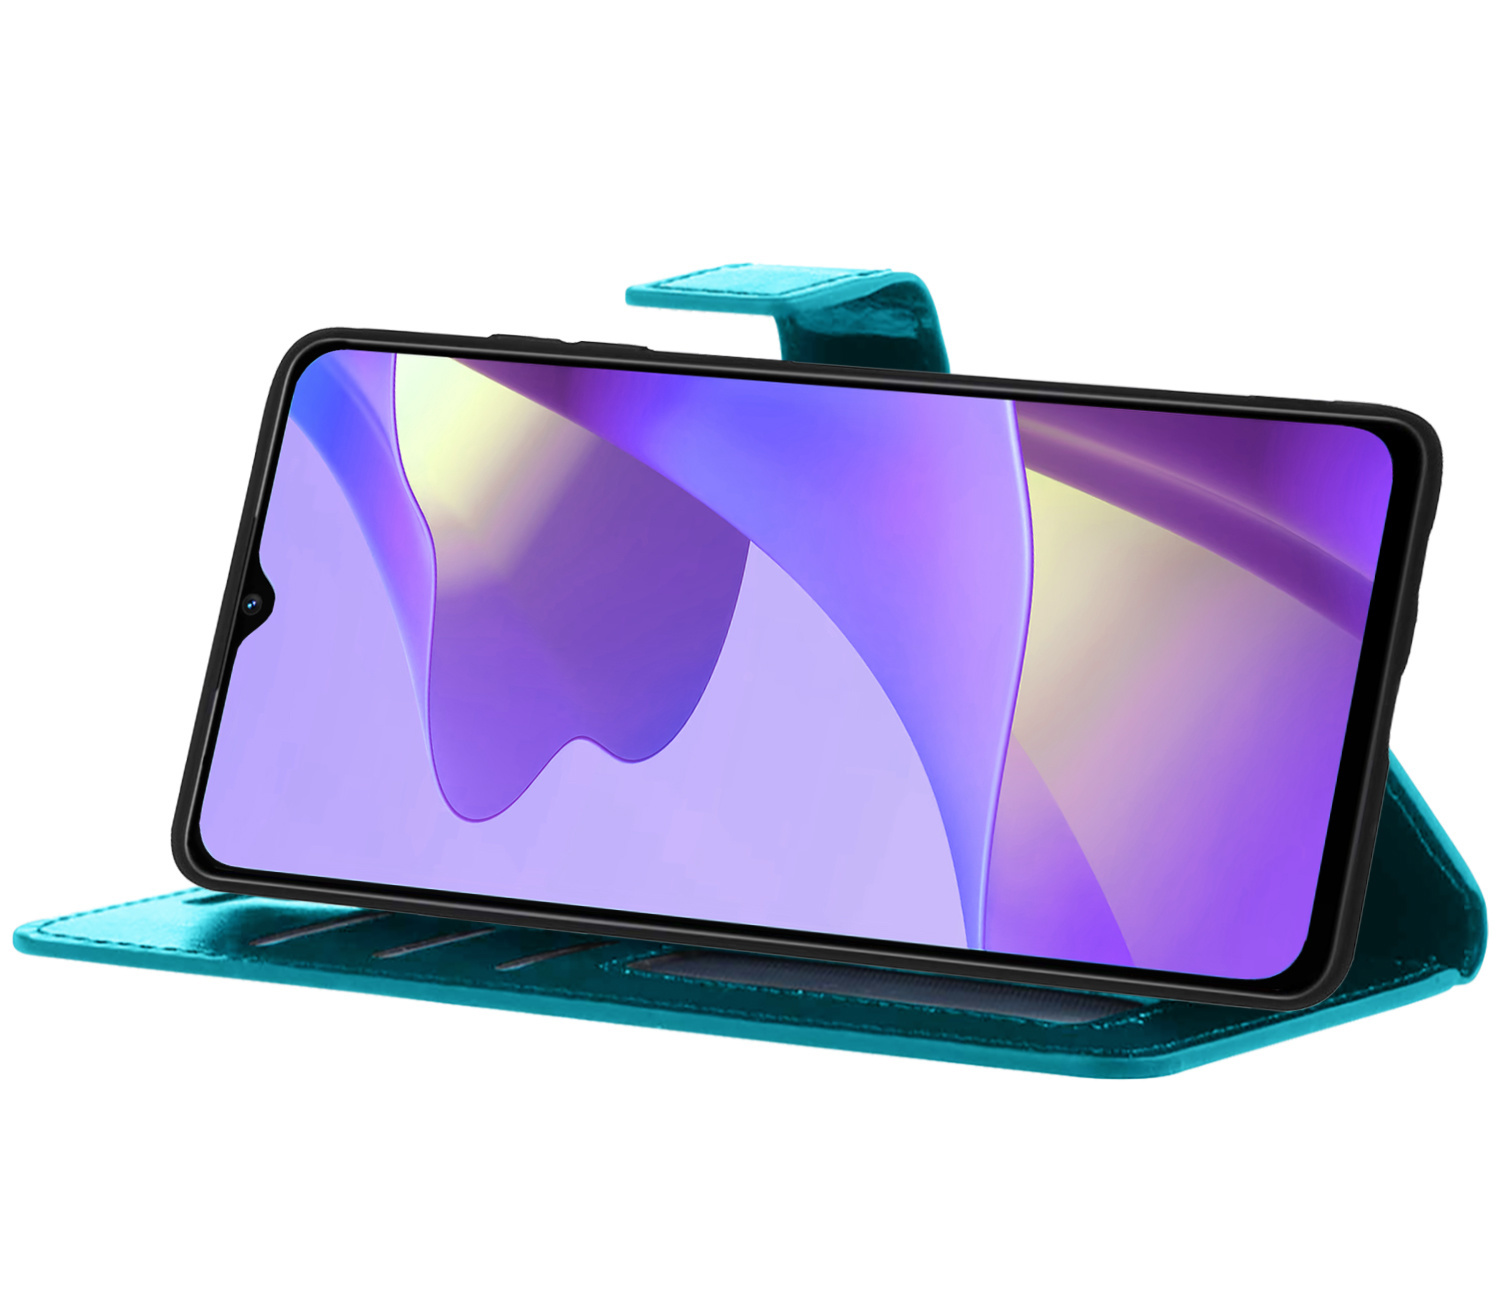 Nomfy OPPO A16s Hoes Bookcase Turquoise - Flipcase Turquoise - OPPO A16s Book Cover - OPPO A16s Hoesje Turquoise